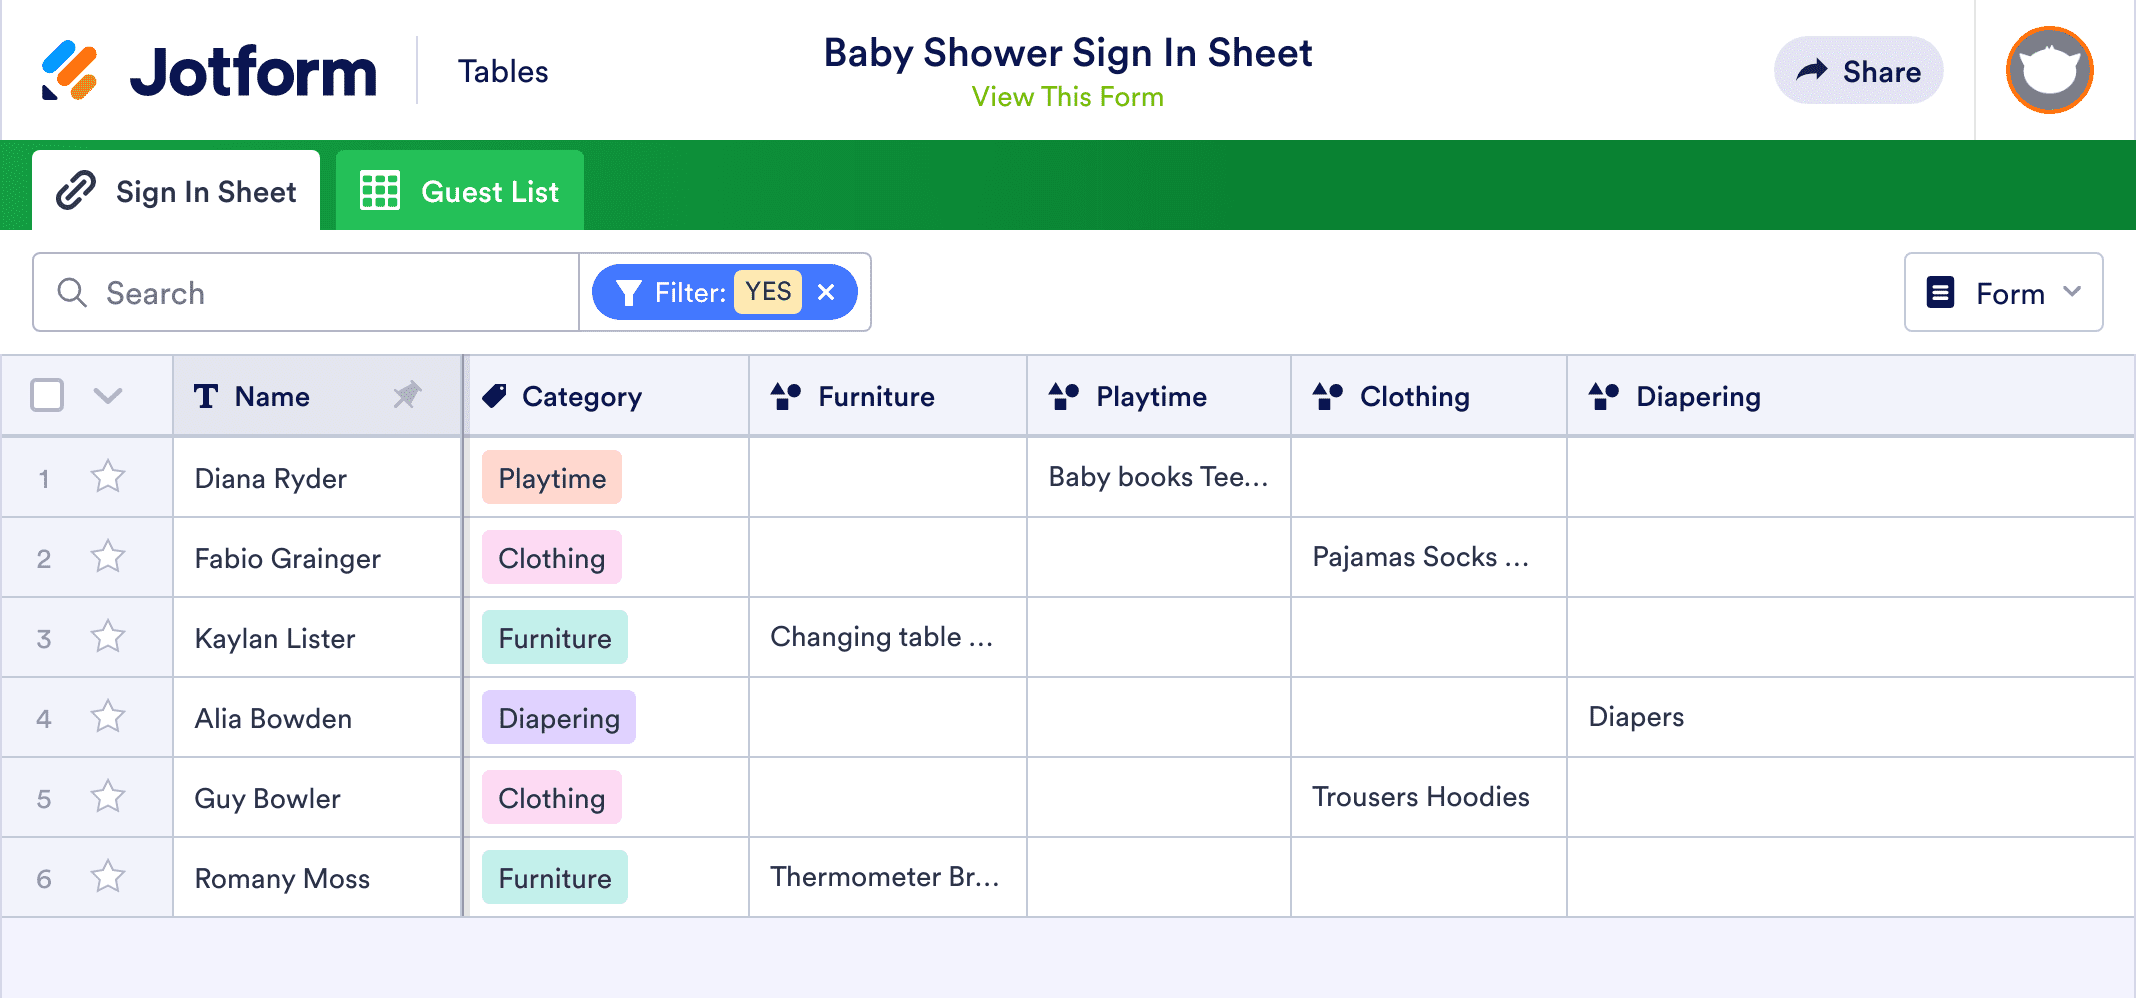 Baby Shower Sign In Sheet